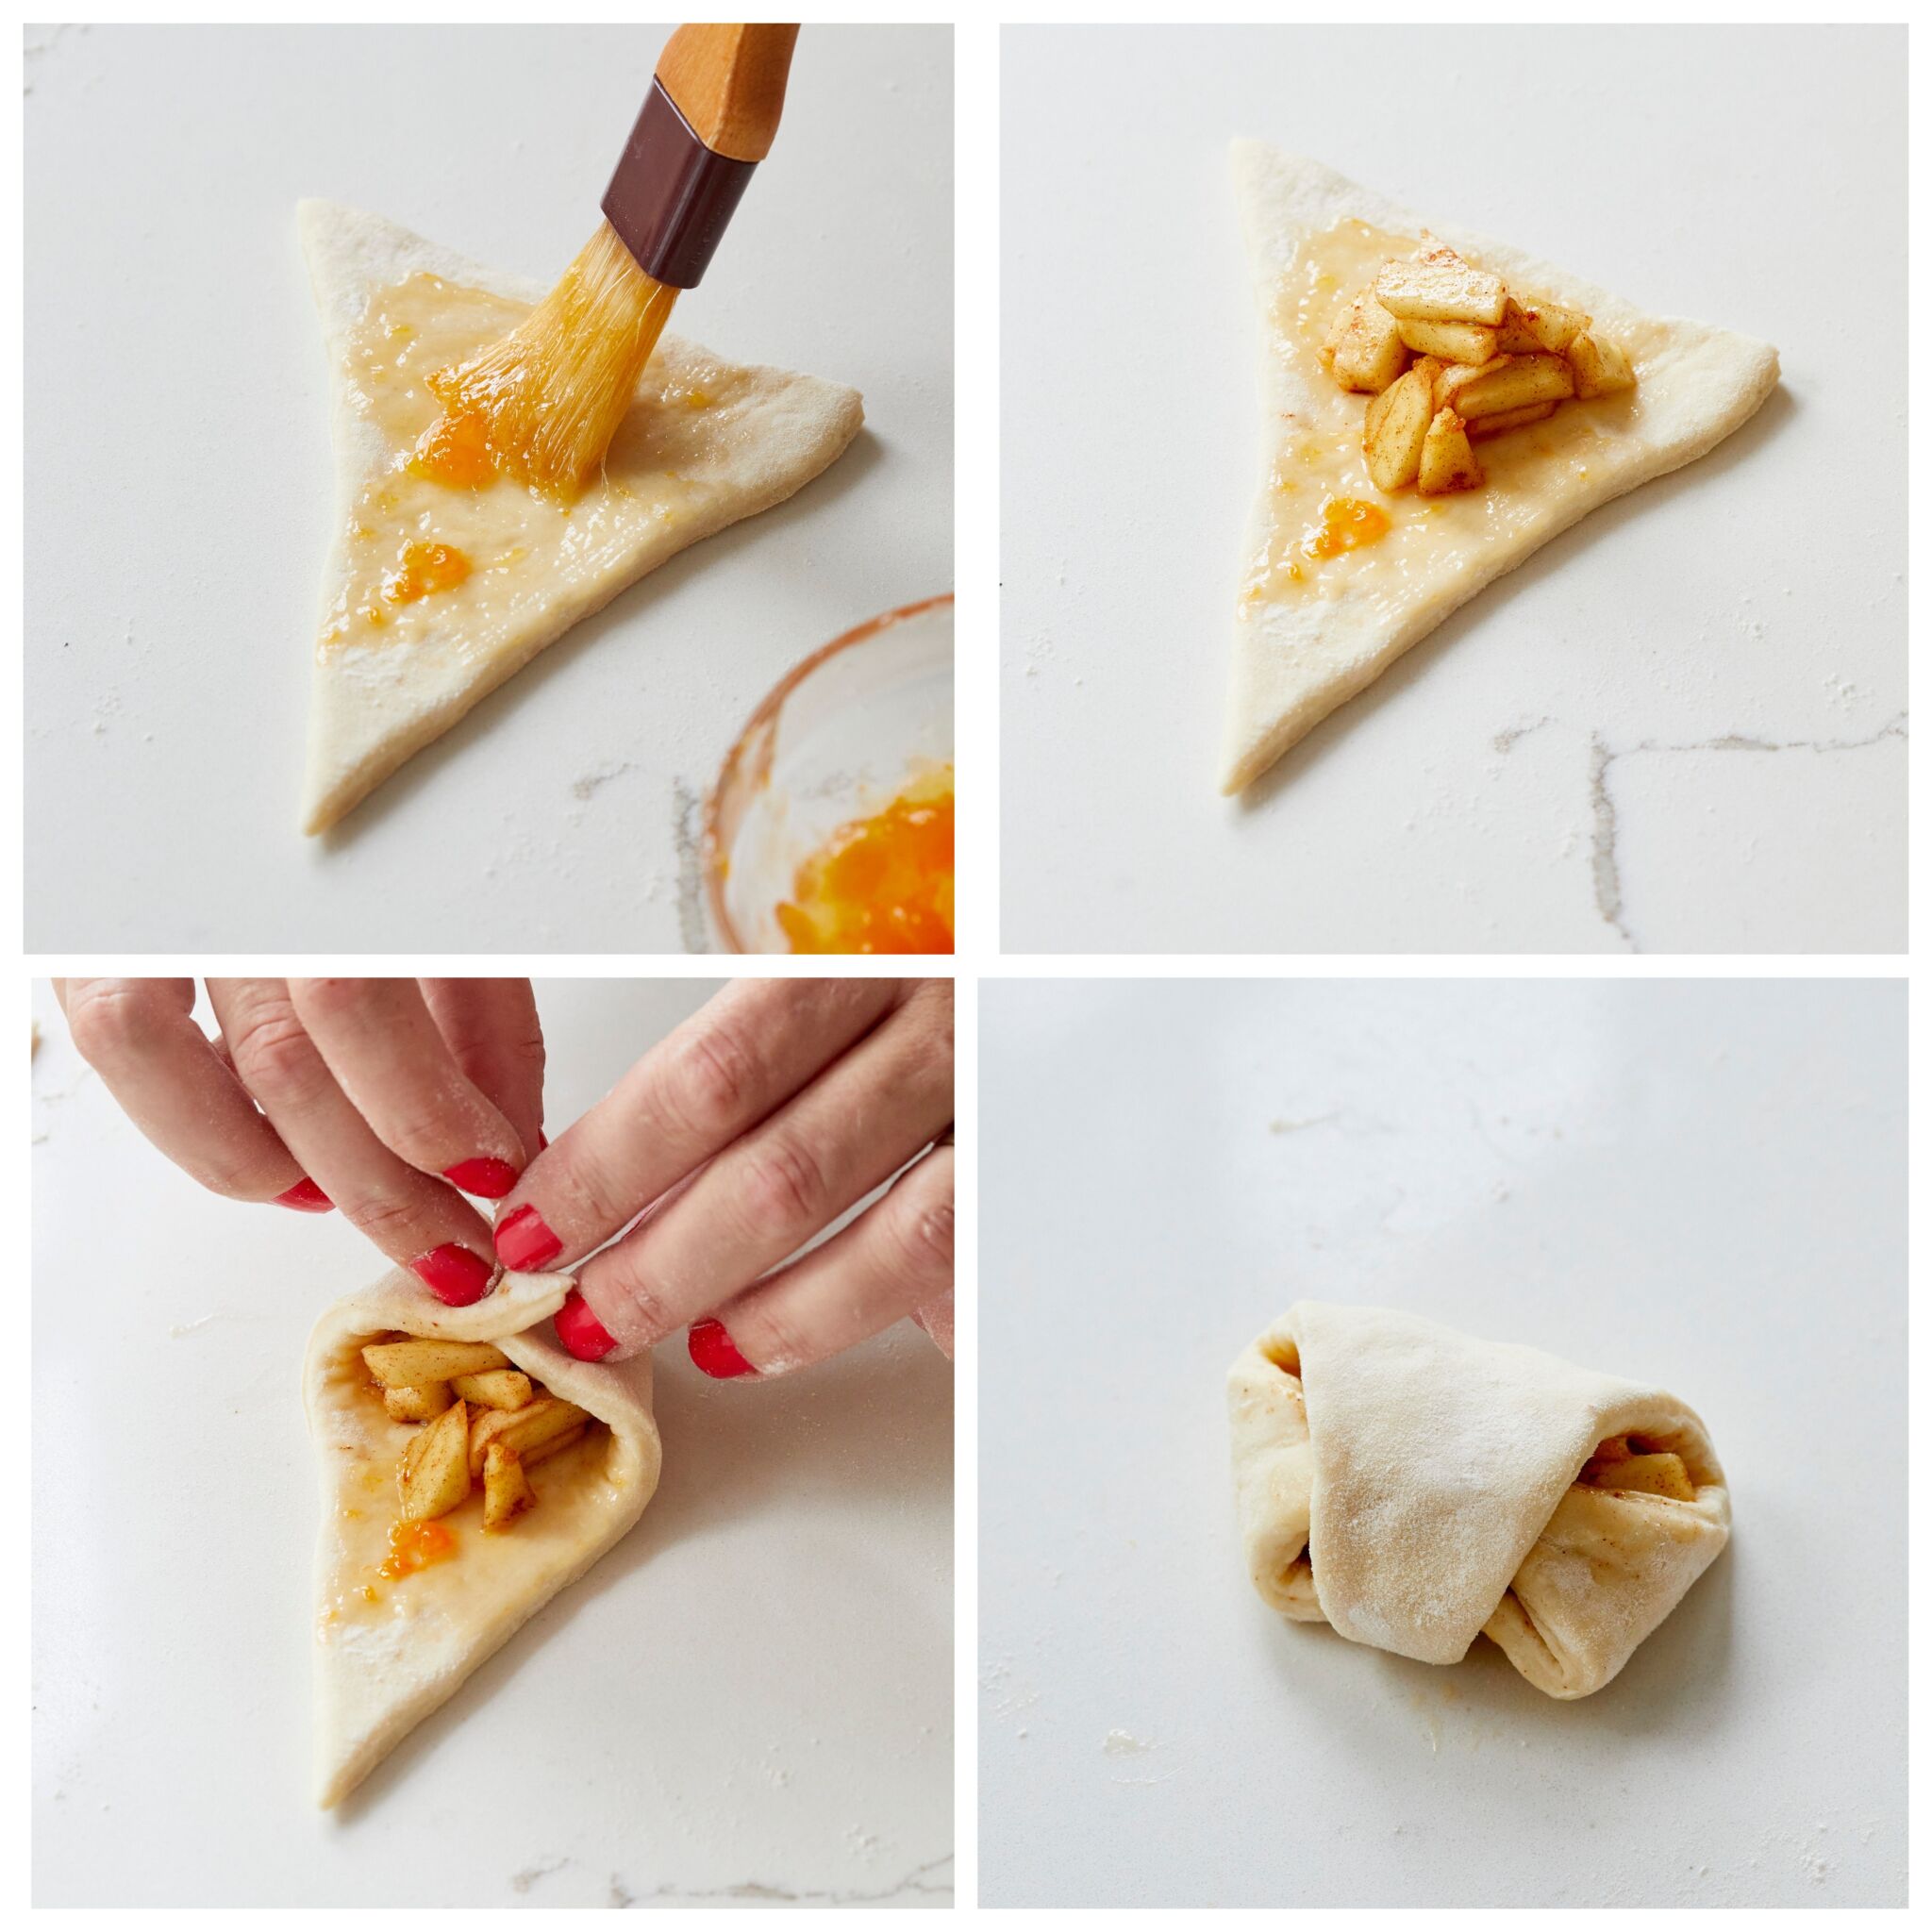 Step-by-step instruction on how to make apple pie crescent rolls: Place one tablespoon of apple filling on each dough triangle. Fold corners over, and roll up to seal. Place on a baking sheet and brush with egg wash.